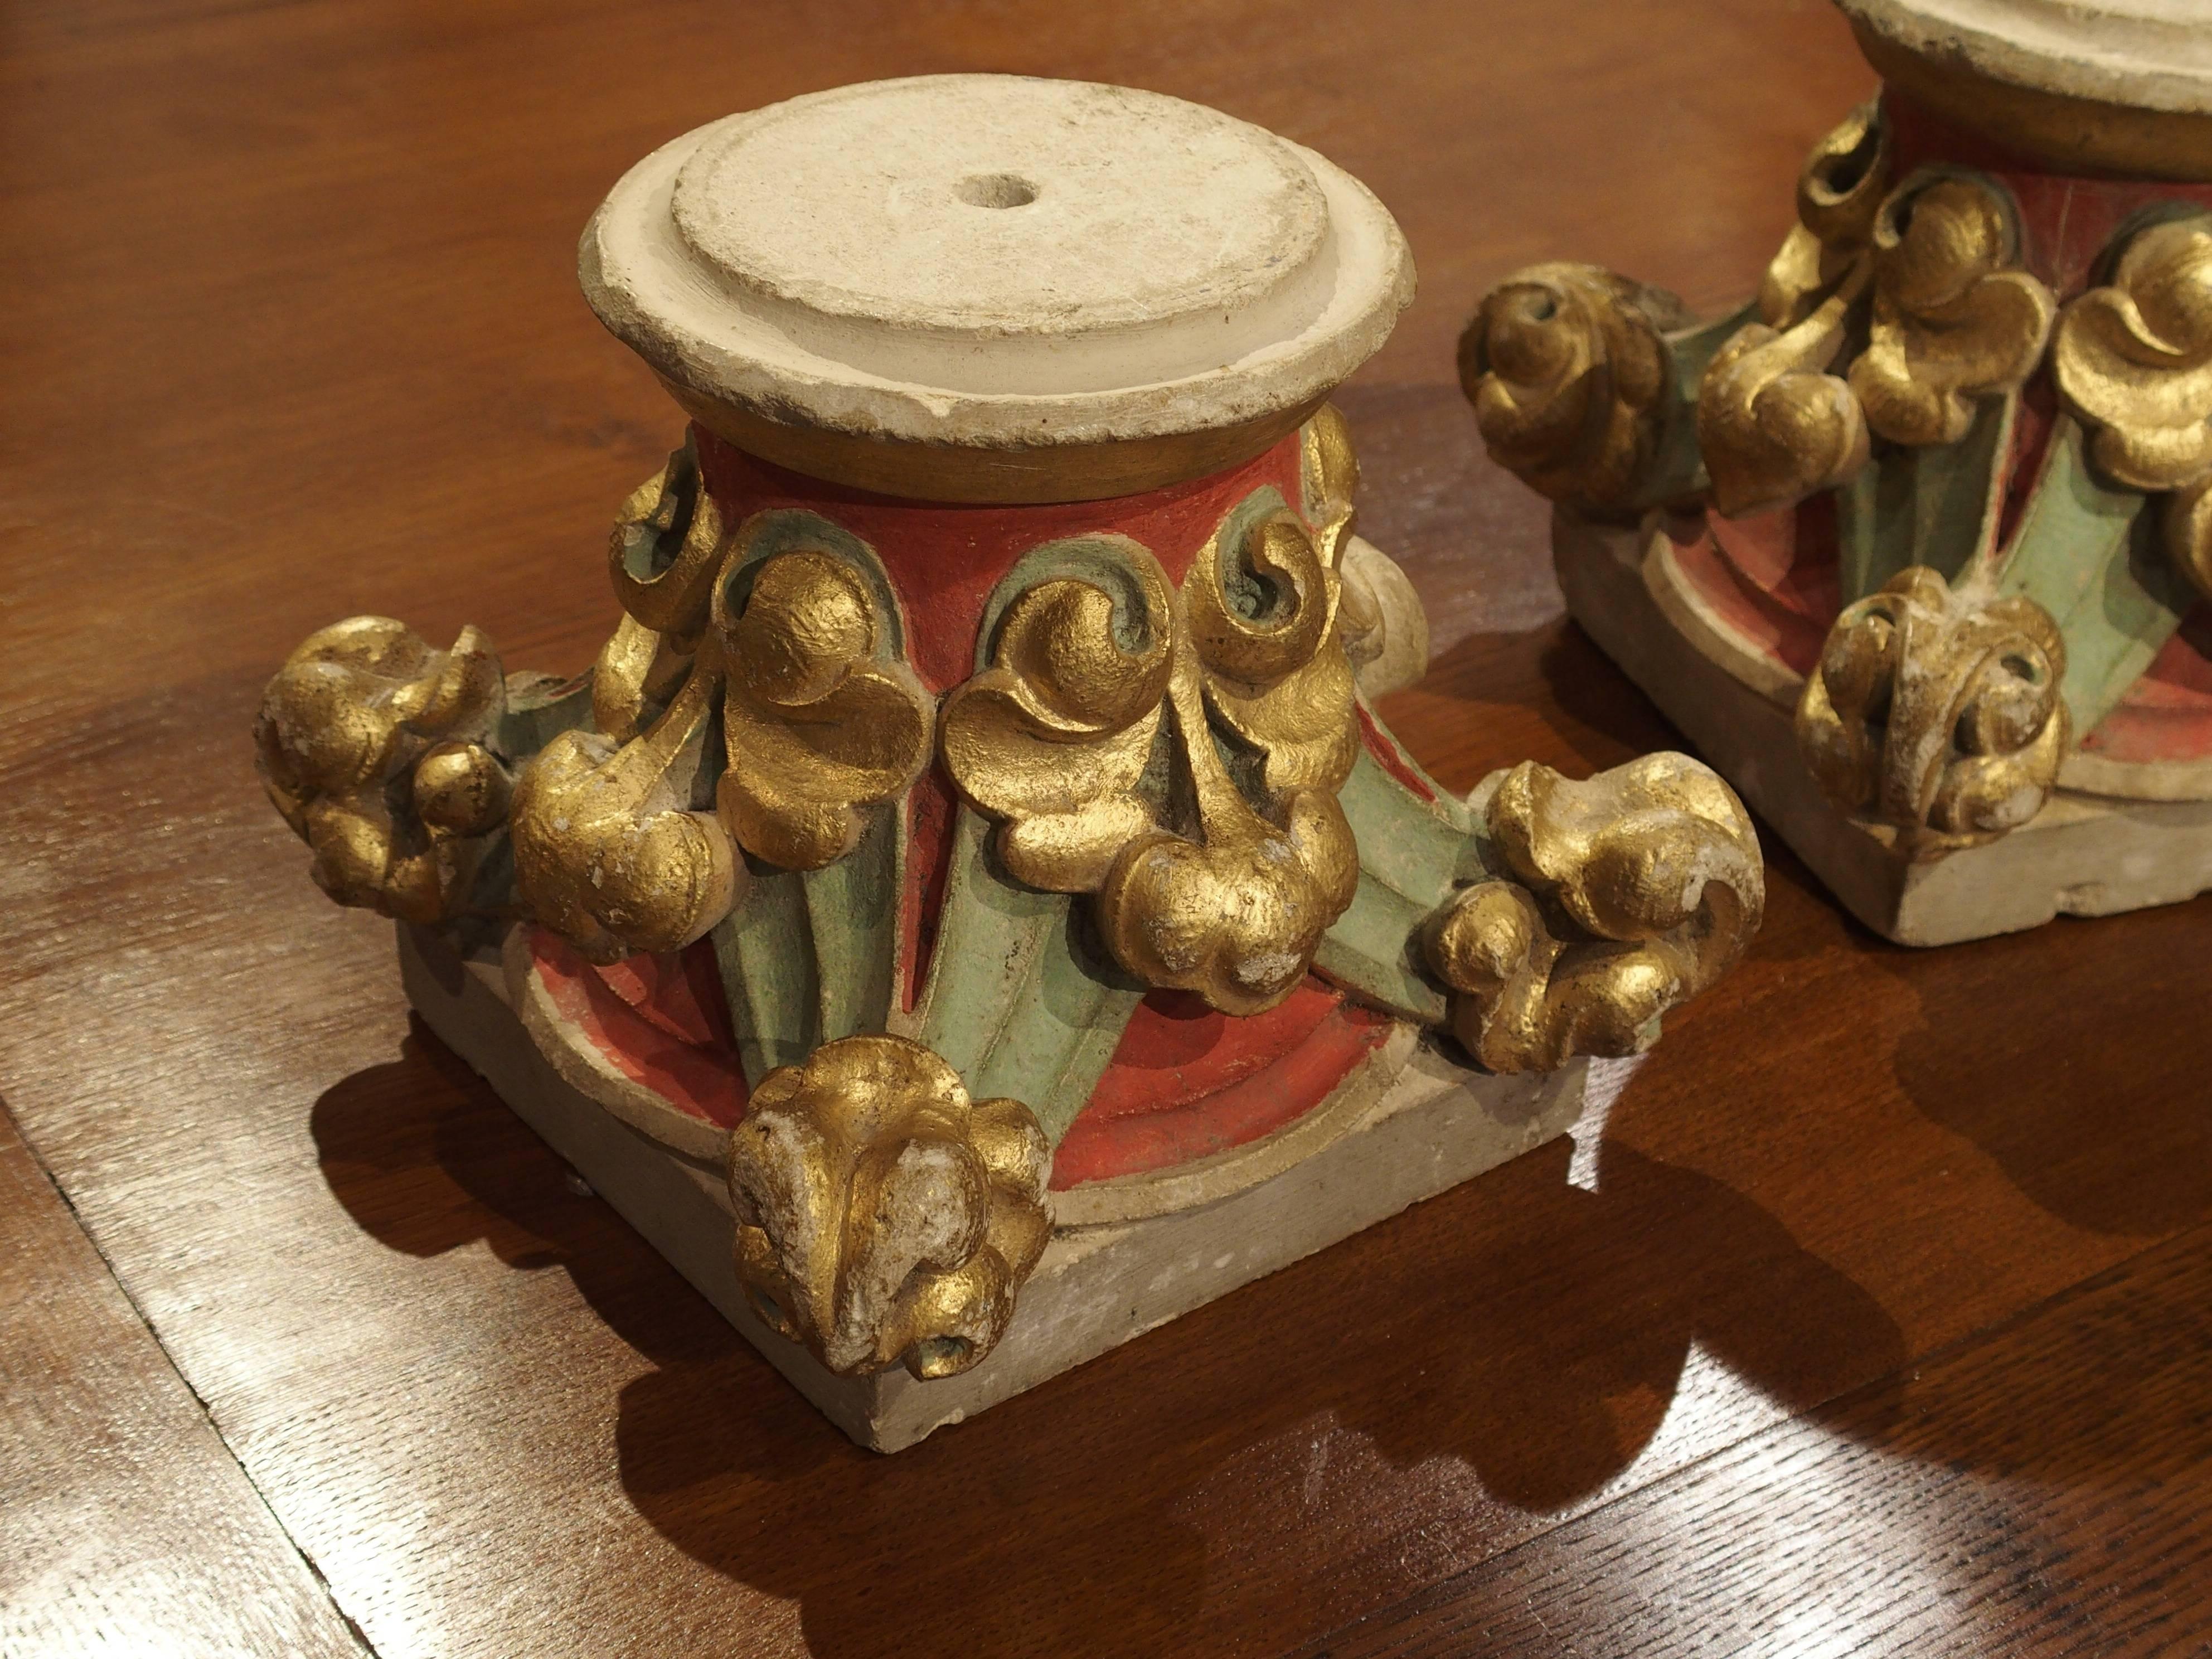 This interesting pair of small antique French stone capitals has been carved and painted with gold, aqua and red. The capitals rest upon a circular base which most likely would have been placed into columns of some sort. The tops are square and